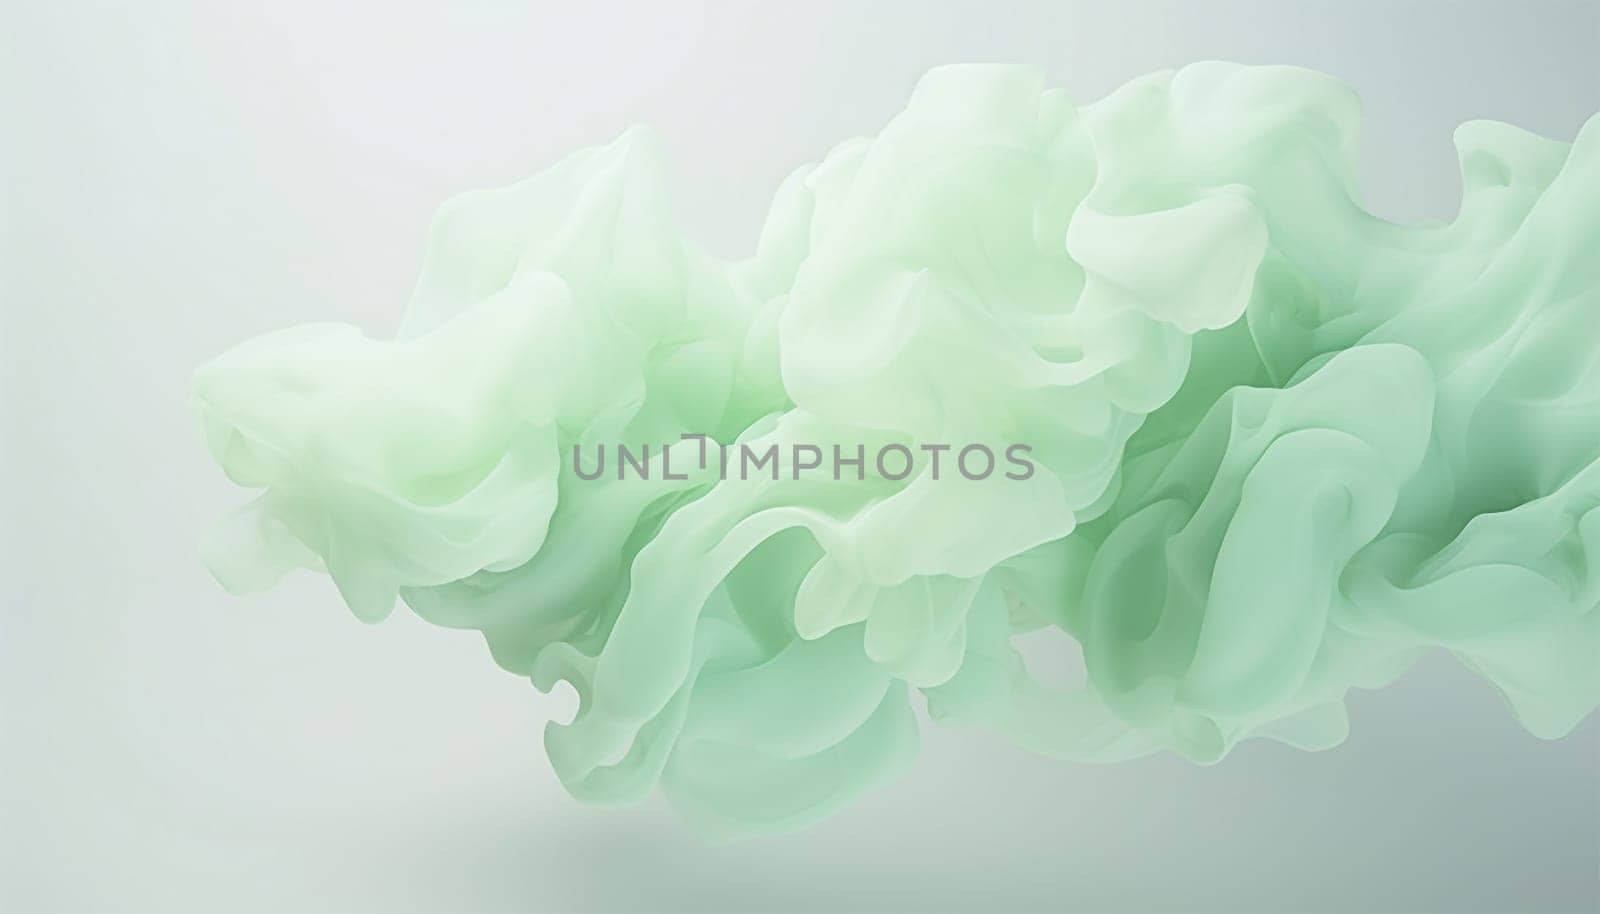 Realistic 3D smoke cloud pastel colored green and pink. 3d realistic clouds set isolated on a dark background. Render soft round cartoon fluffy clouds icon in the sky. 3d geometric shapes illustration by Annebel146